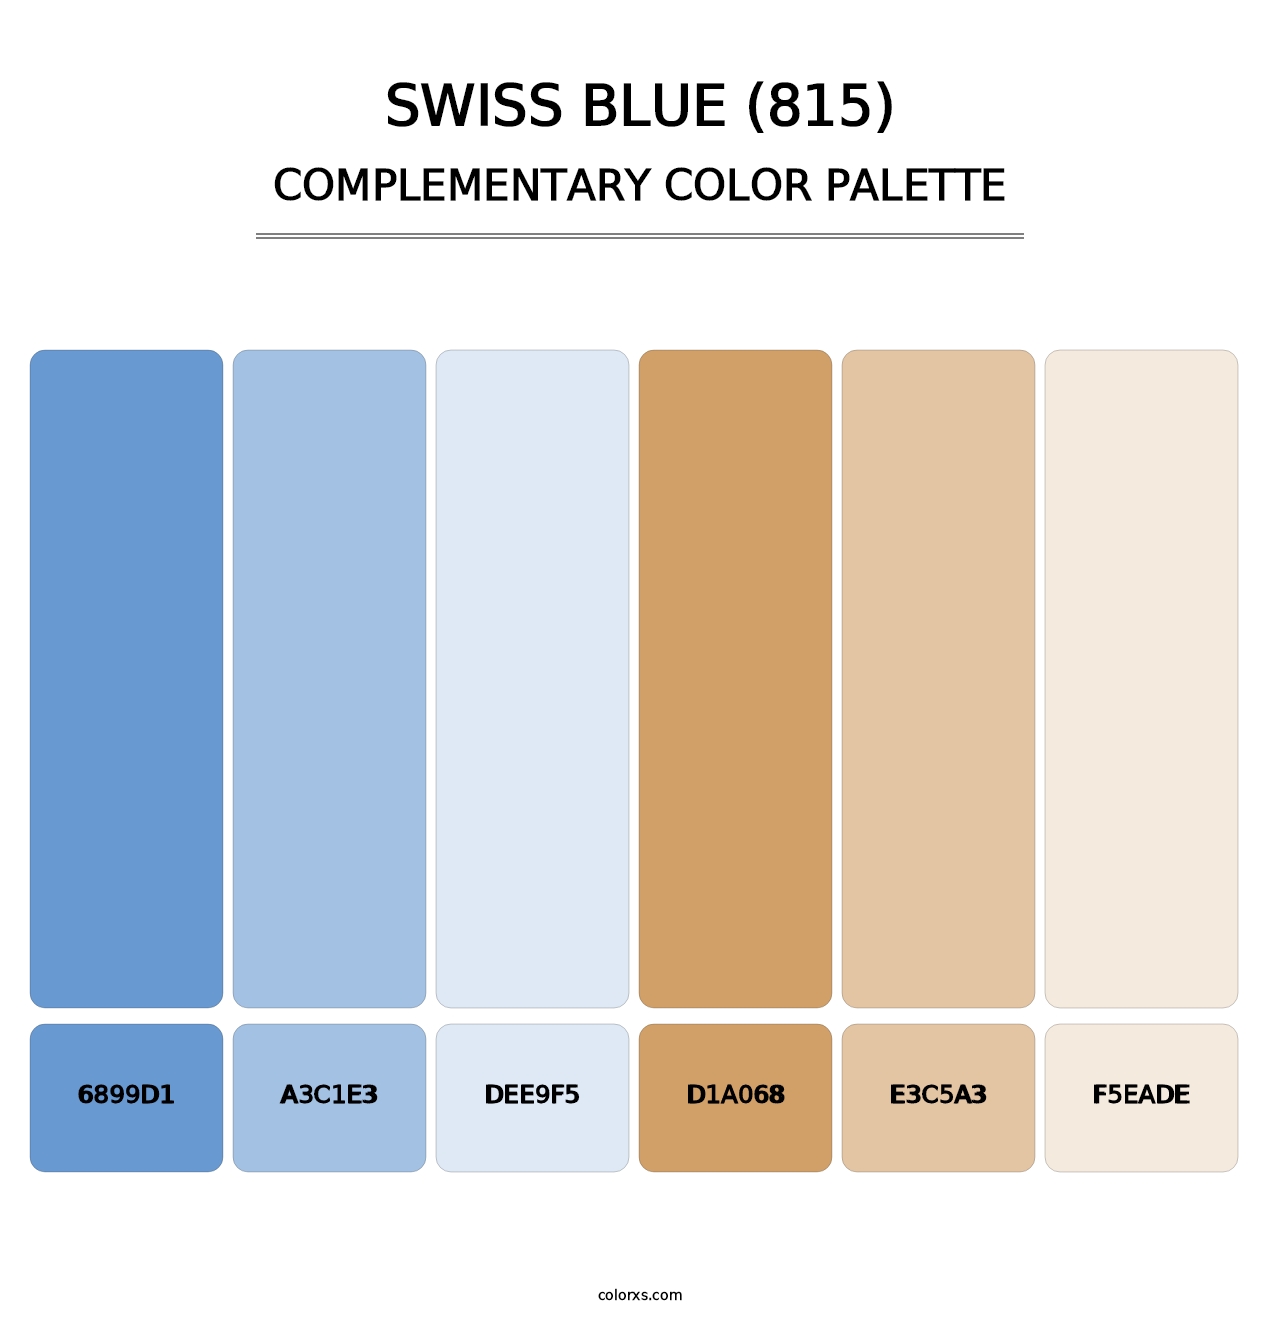 Swiss Blue (815) - Complementary Color Palette